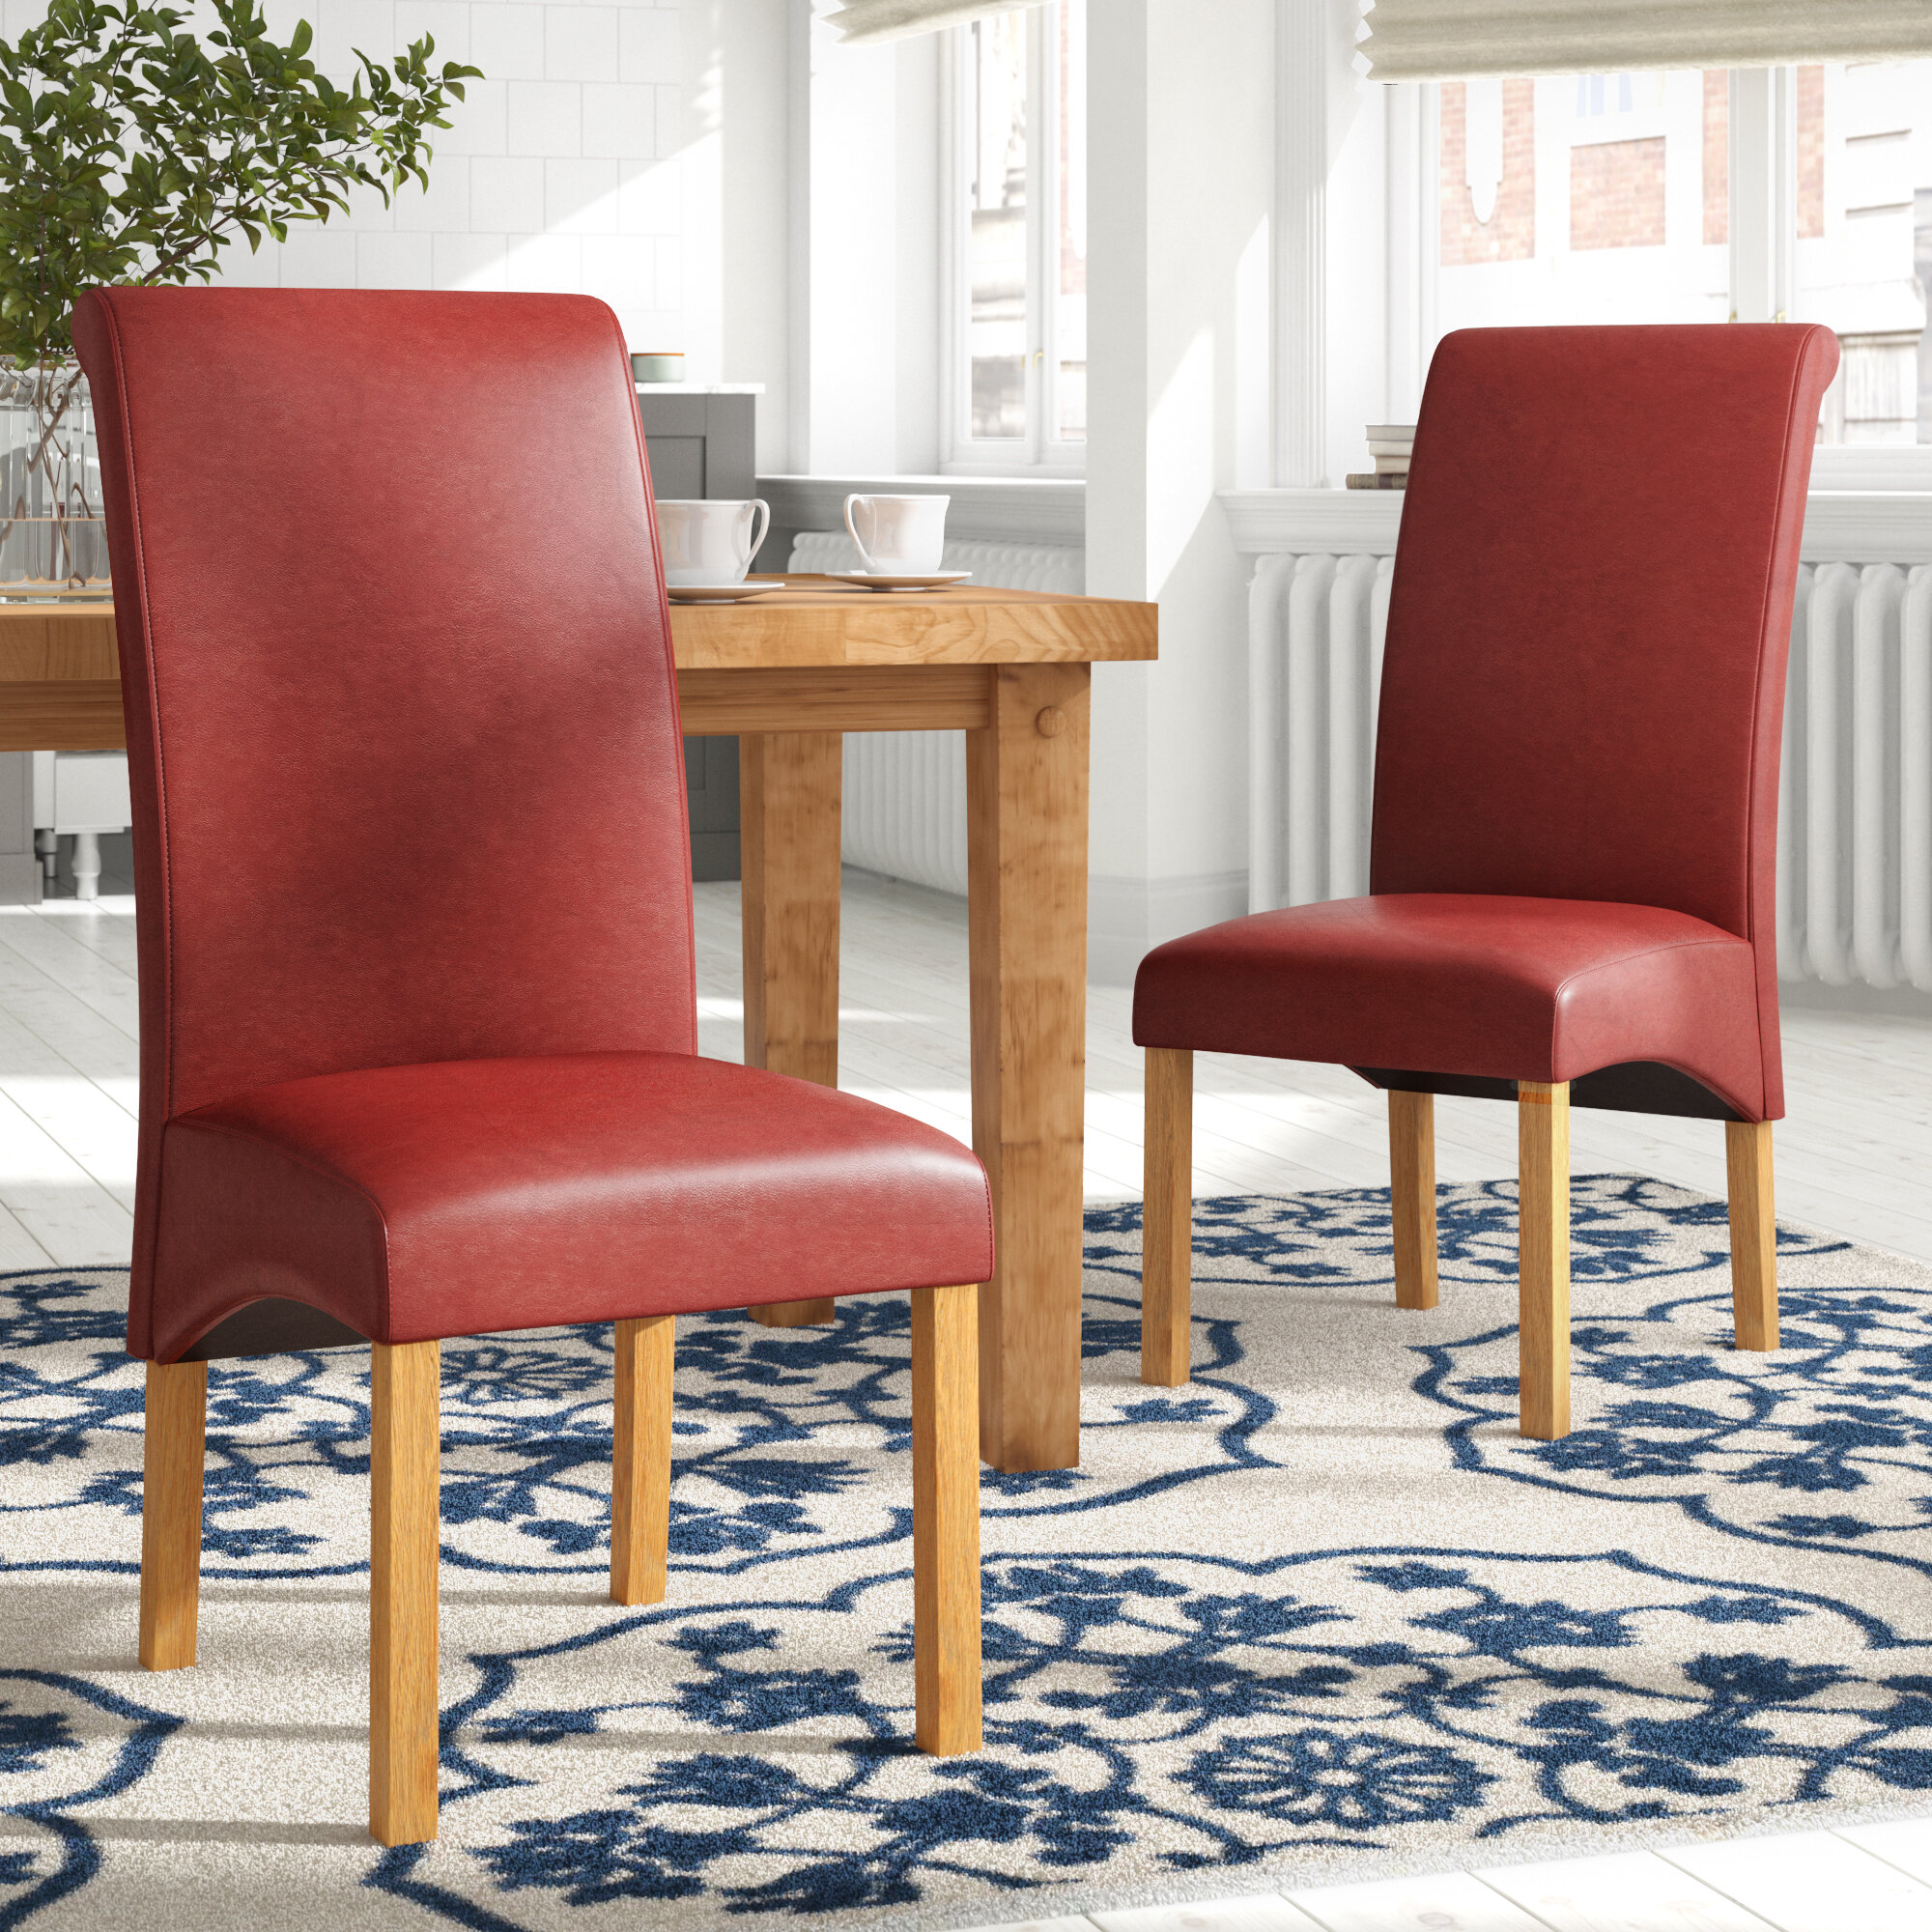 Marlow Home Co Collman Upholstered Dining Chair Reviews Wayfair Co Uk